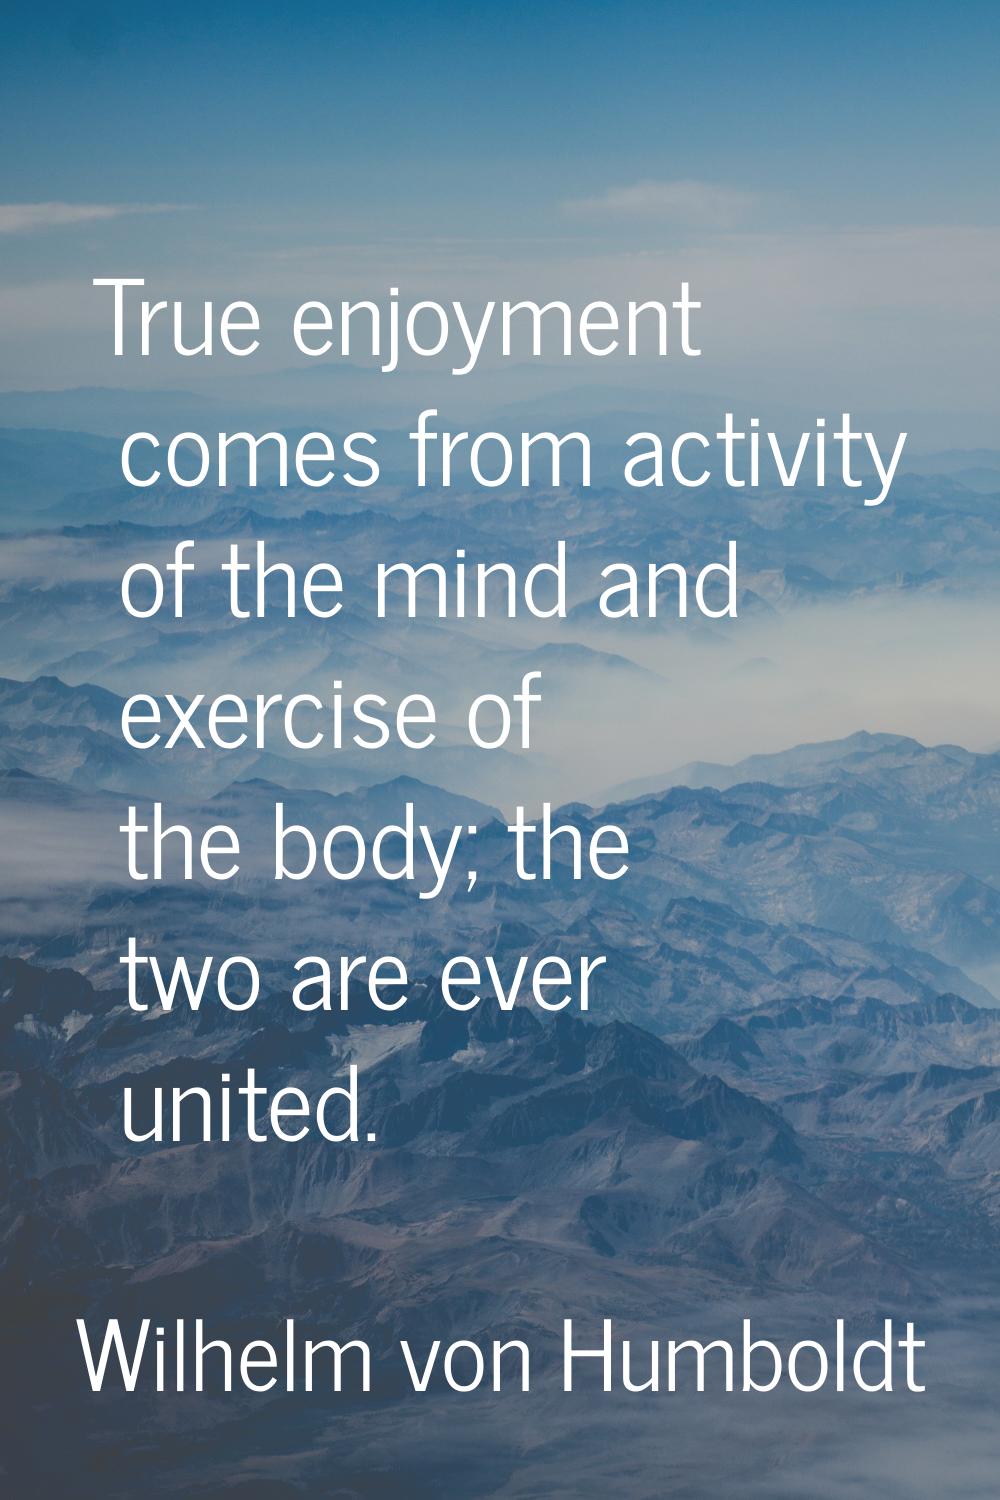 True enjoyment comes from activity of the mind and exercise of the body; the two are ever united.